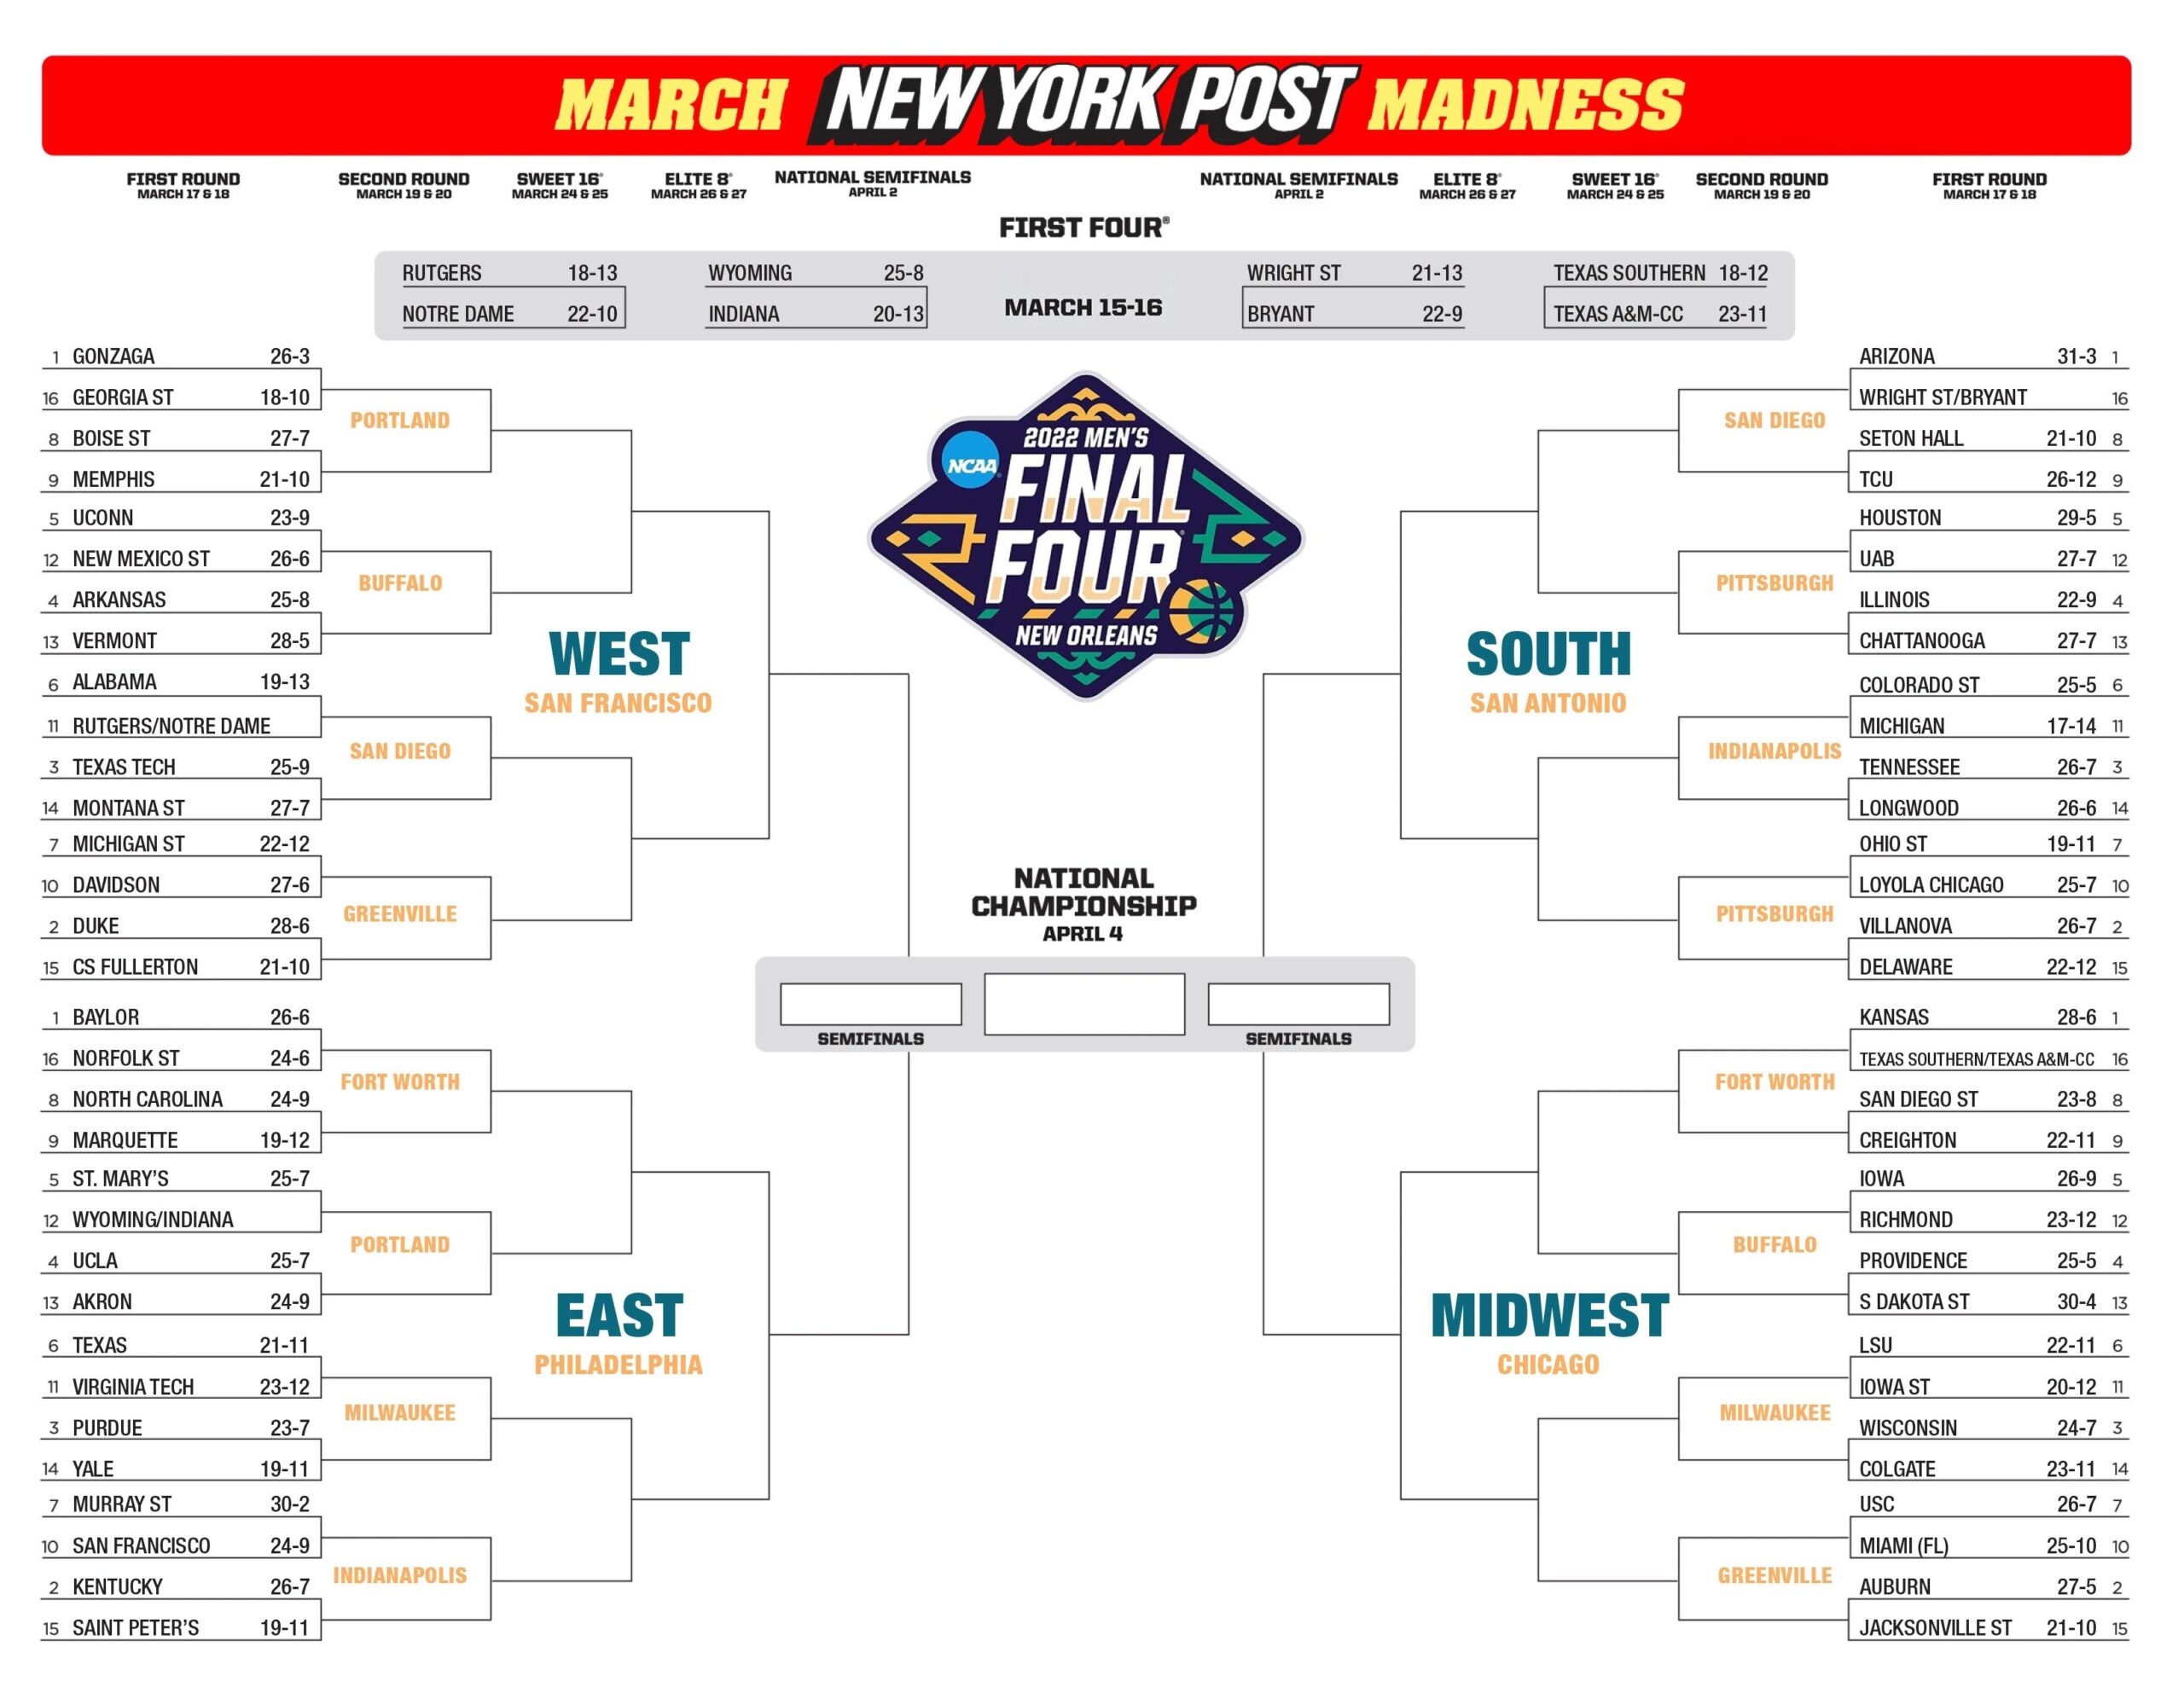 March Madness 2021